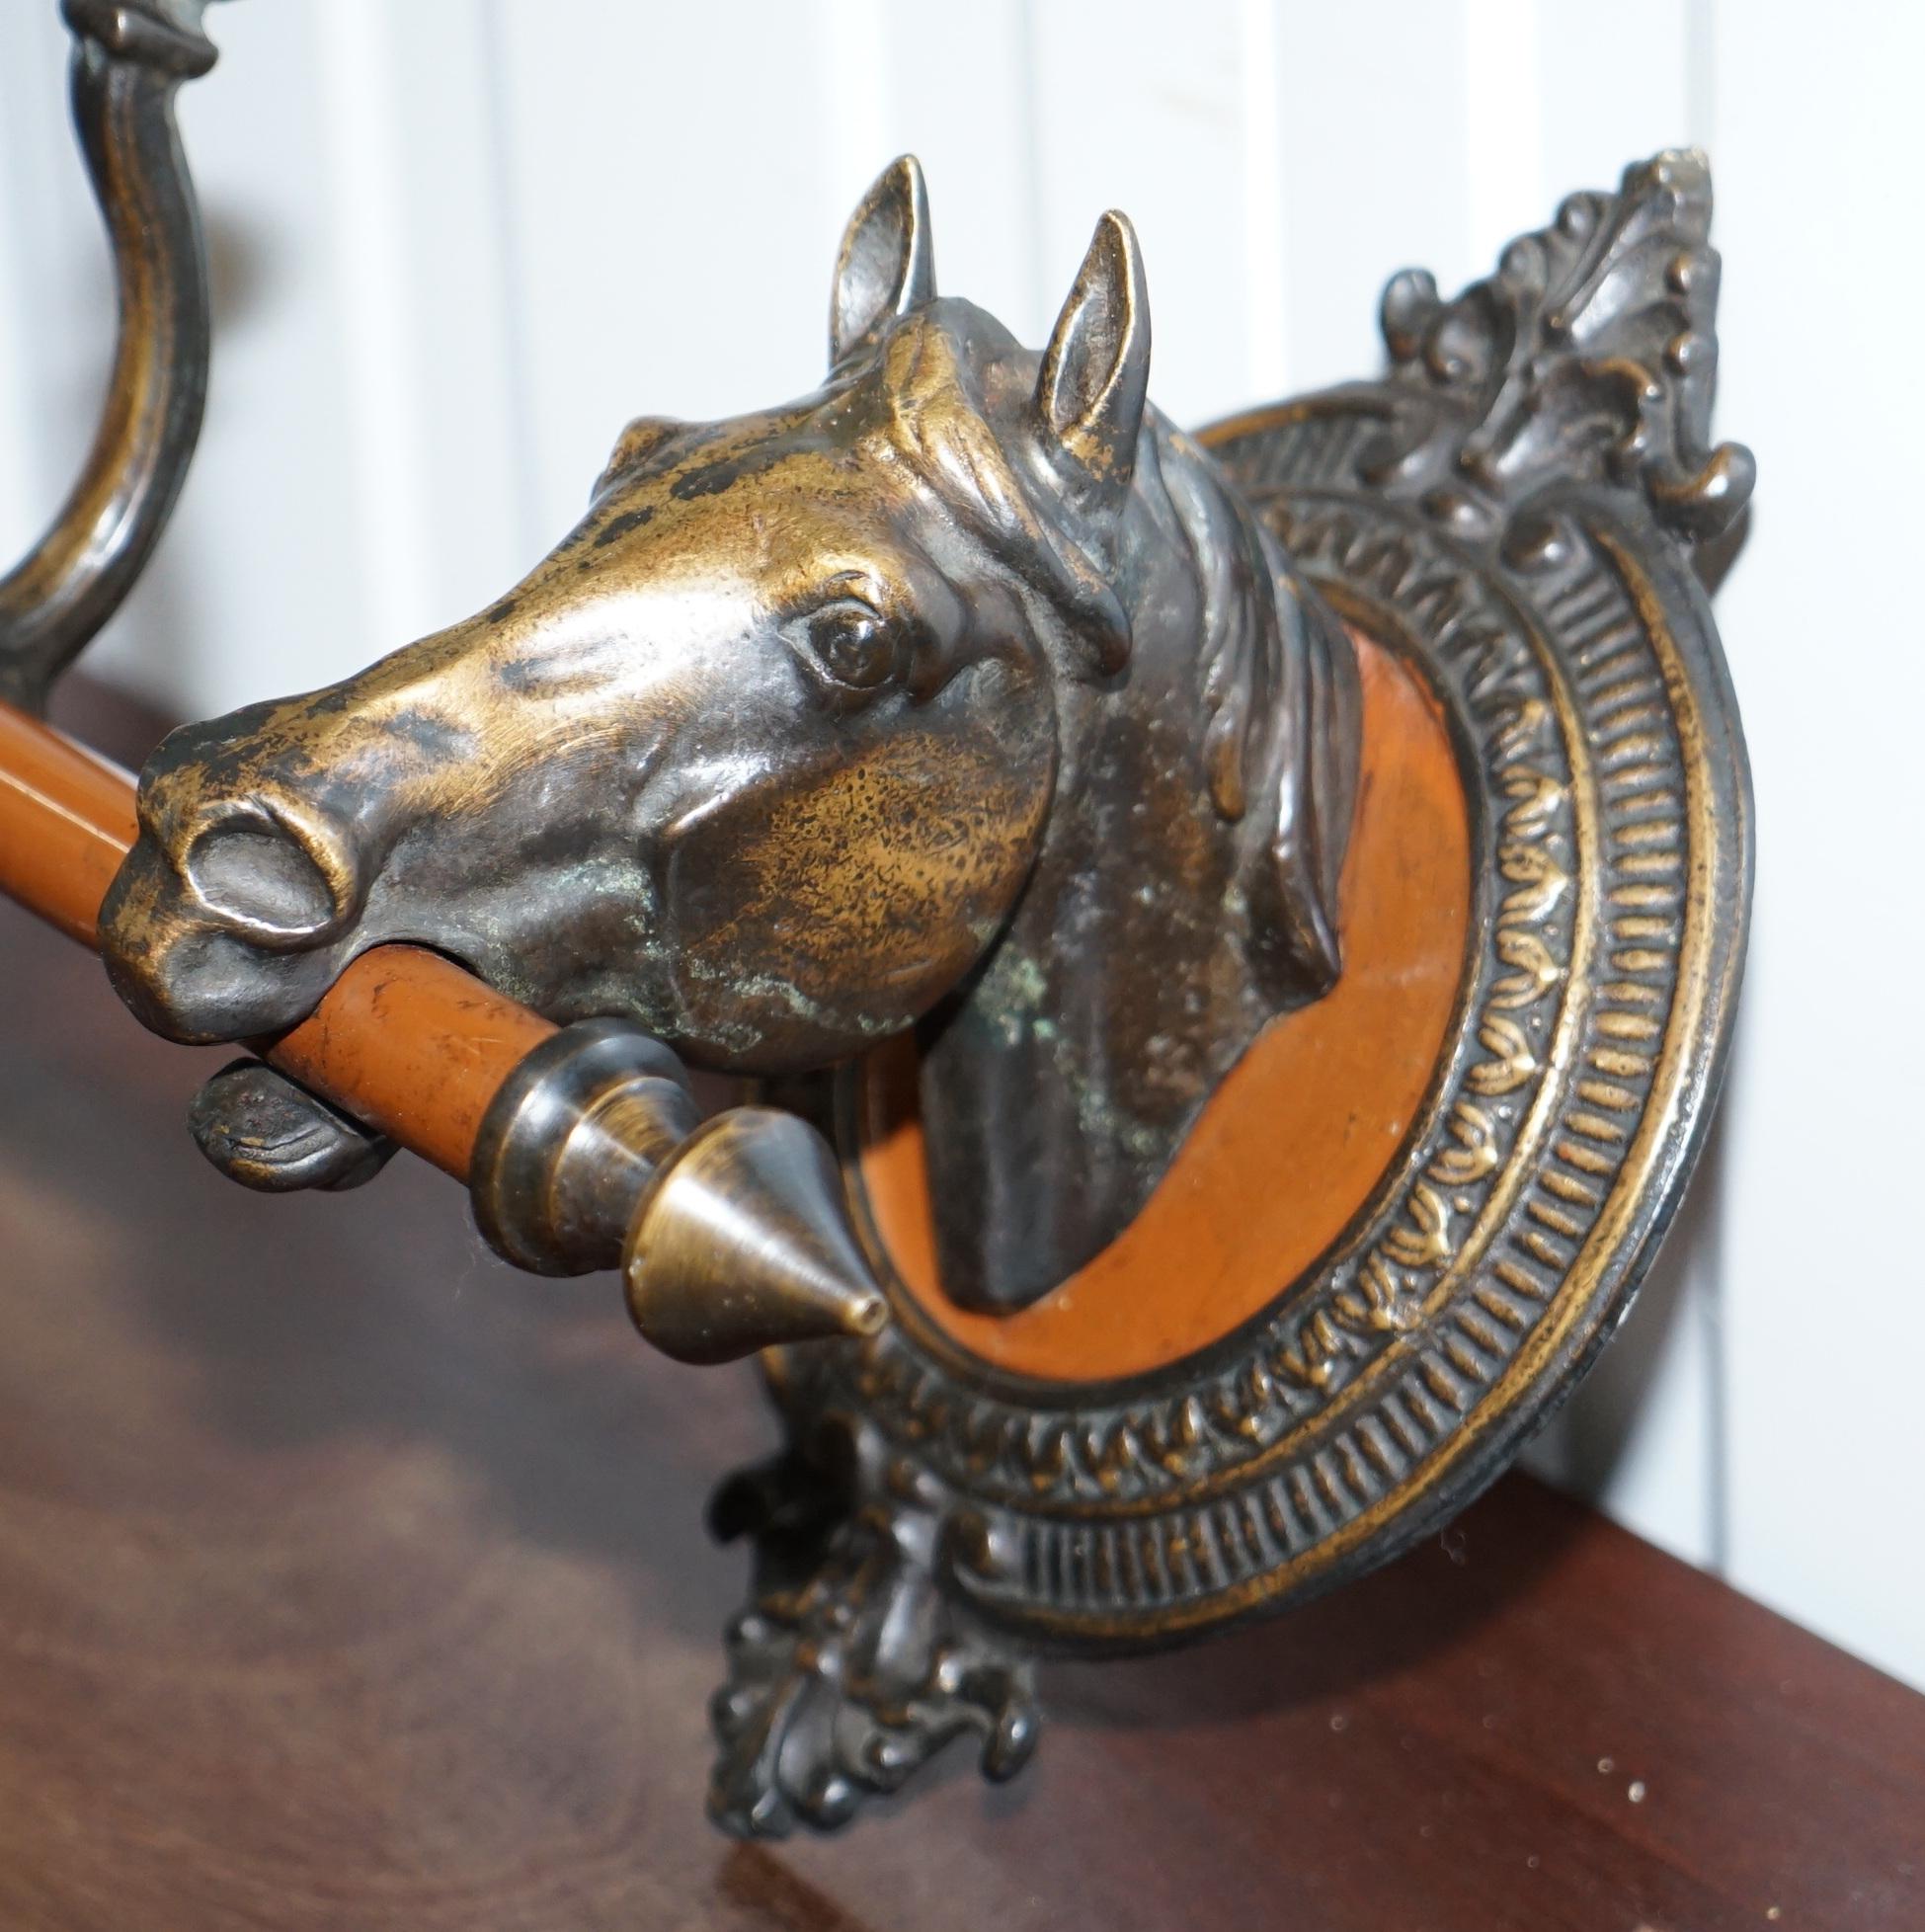 Victorian Rare Solid Bronze-Mounted Horse Head Equestrian Coat Rack for the Wall Hook Hat